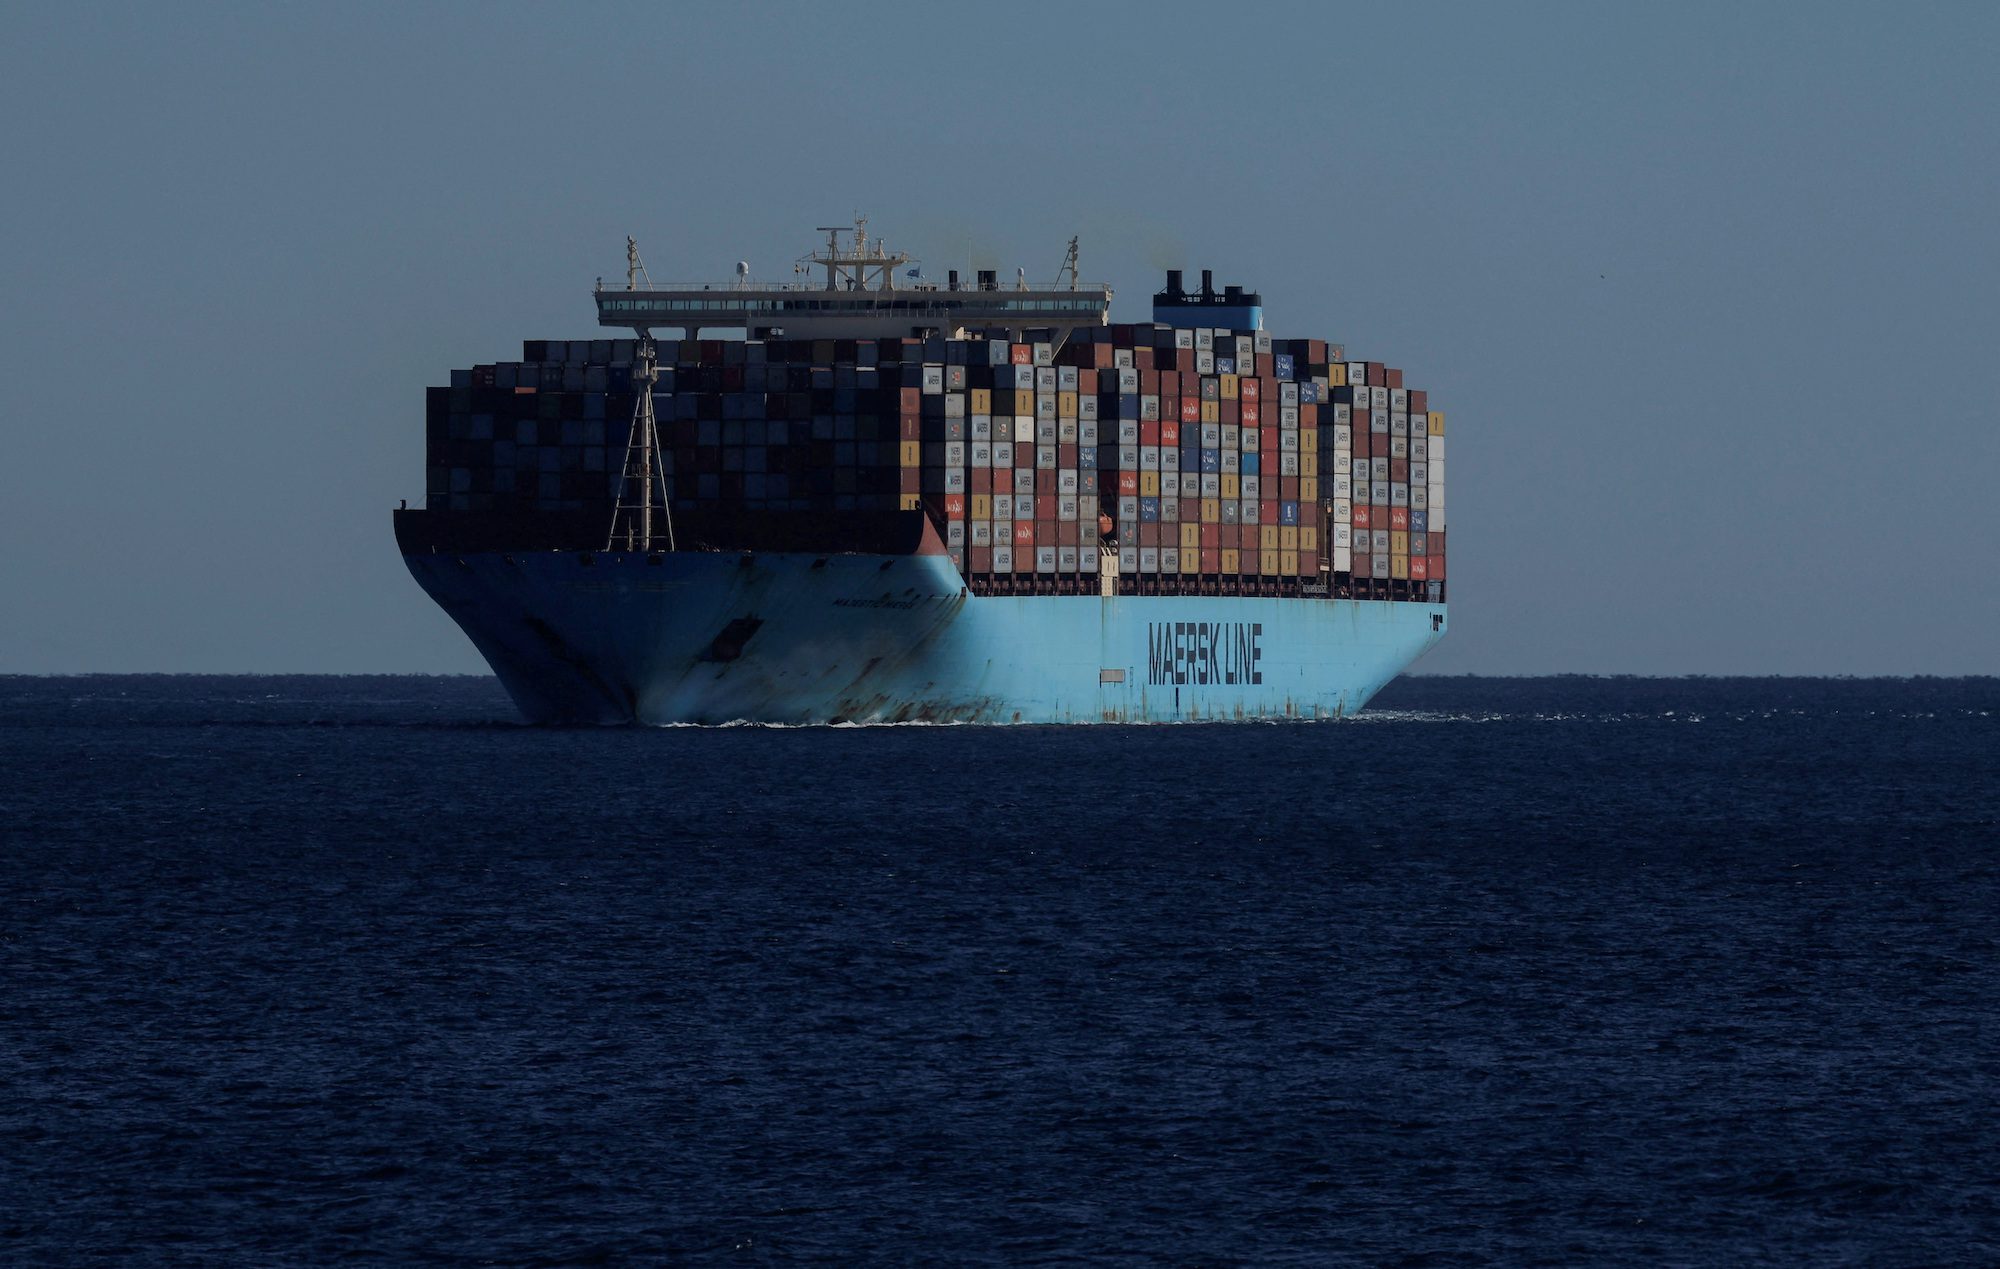 FILE PHOTO: Containers are seen on the Maersk's Triple-E giant container ship Majestic Maersk, one of the world's largest container ships, as it sails in the Strait of Gibraltar towards the port of Algeciras, Spain January 19, 2023. REUTERS/Jon Nazca/File Photo